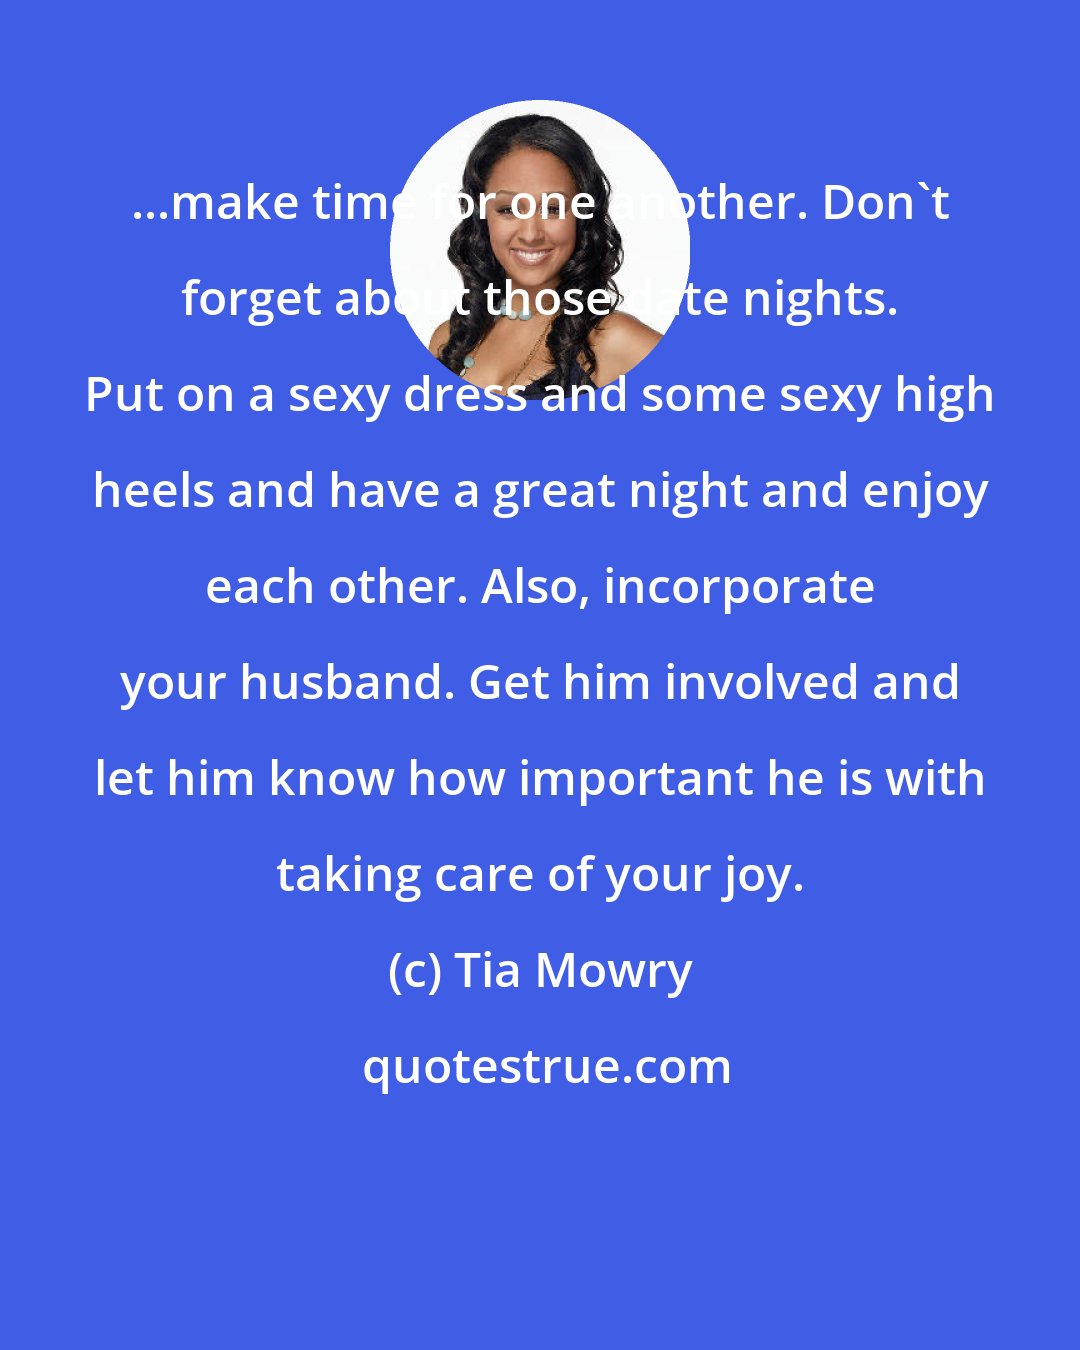 Tia Mowry: ...make time for one another. Don't forget about those date nights. Put on a sexy dress and some sexy high heels and have a great night and enjoy each other. Also, incorporate your husband. Get him involved and let him know how important he is with taking care of your joy.